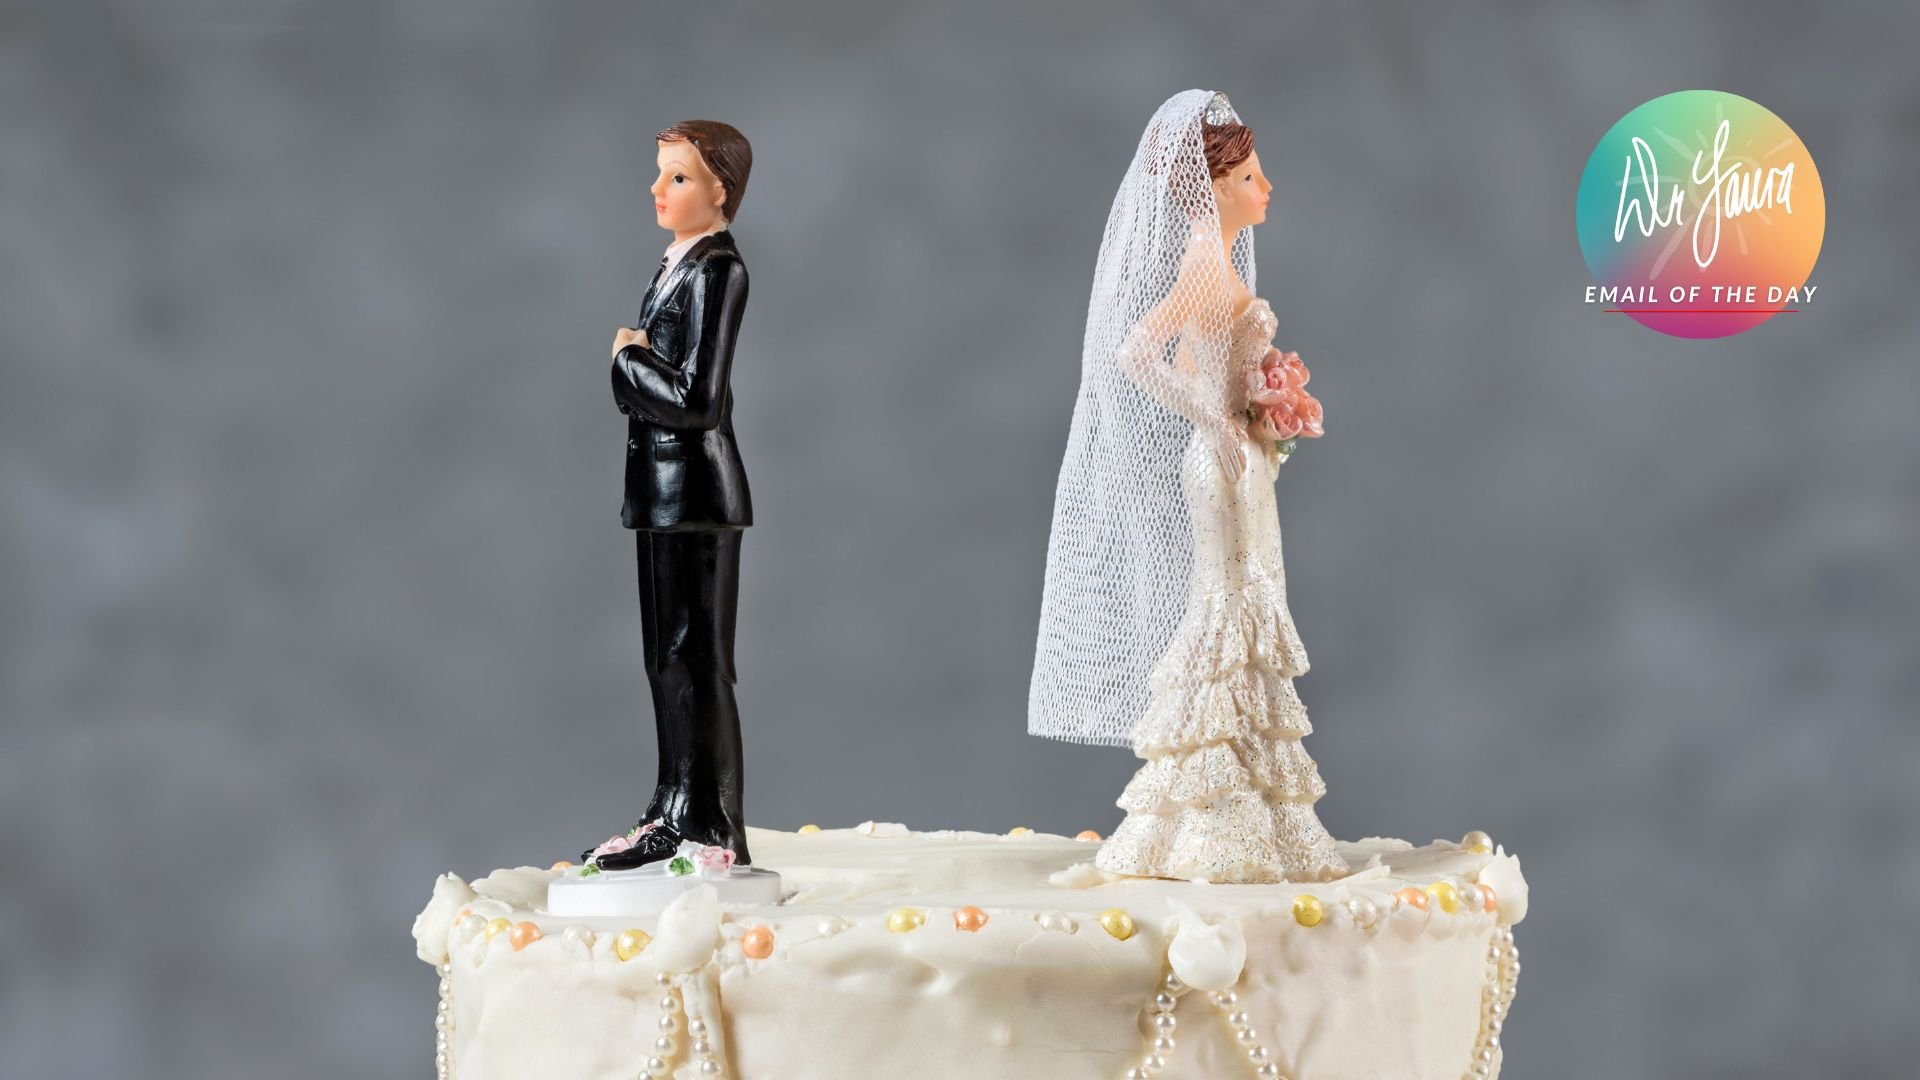 Bride and groom cake toppers face away from each other